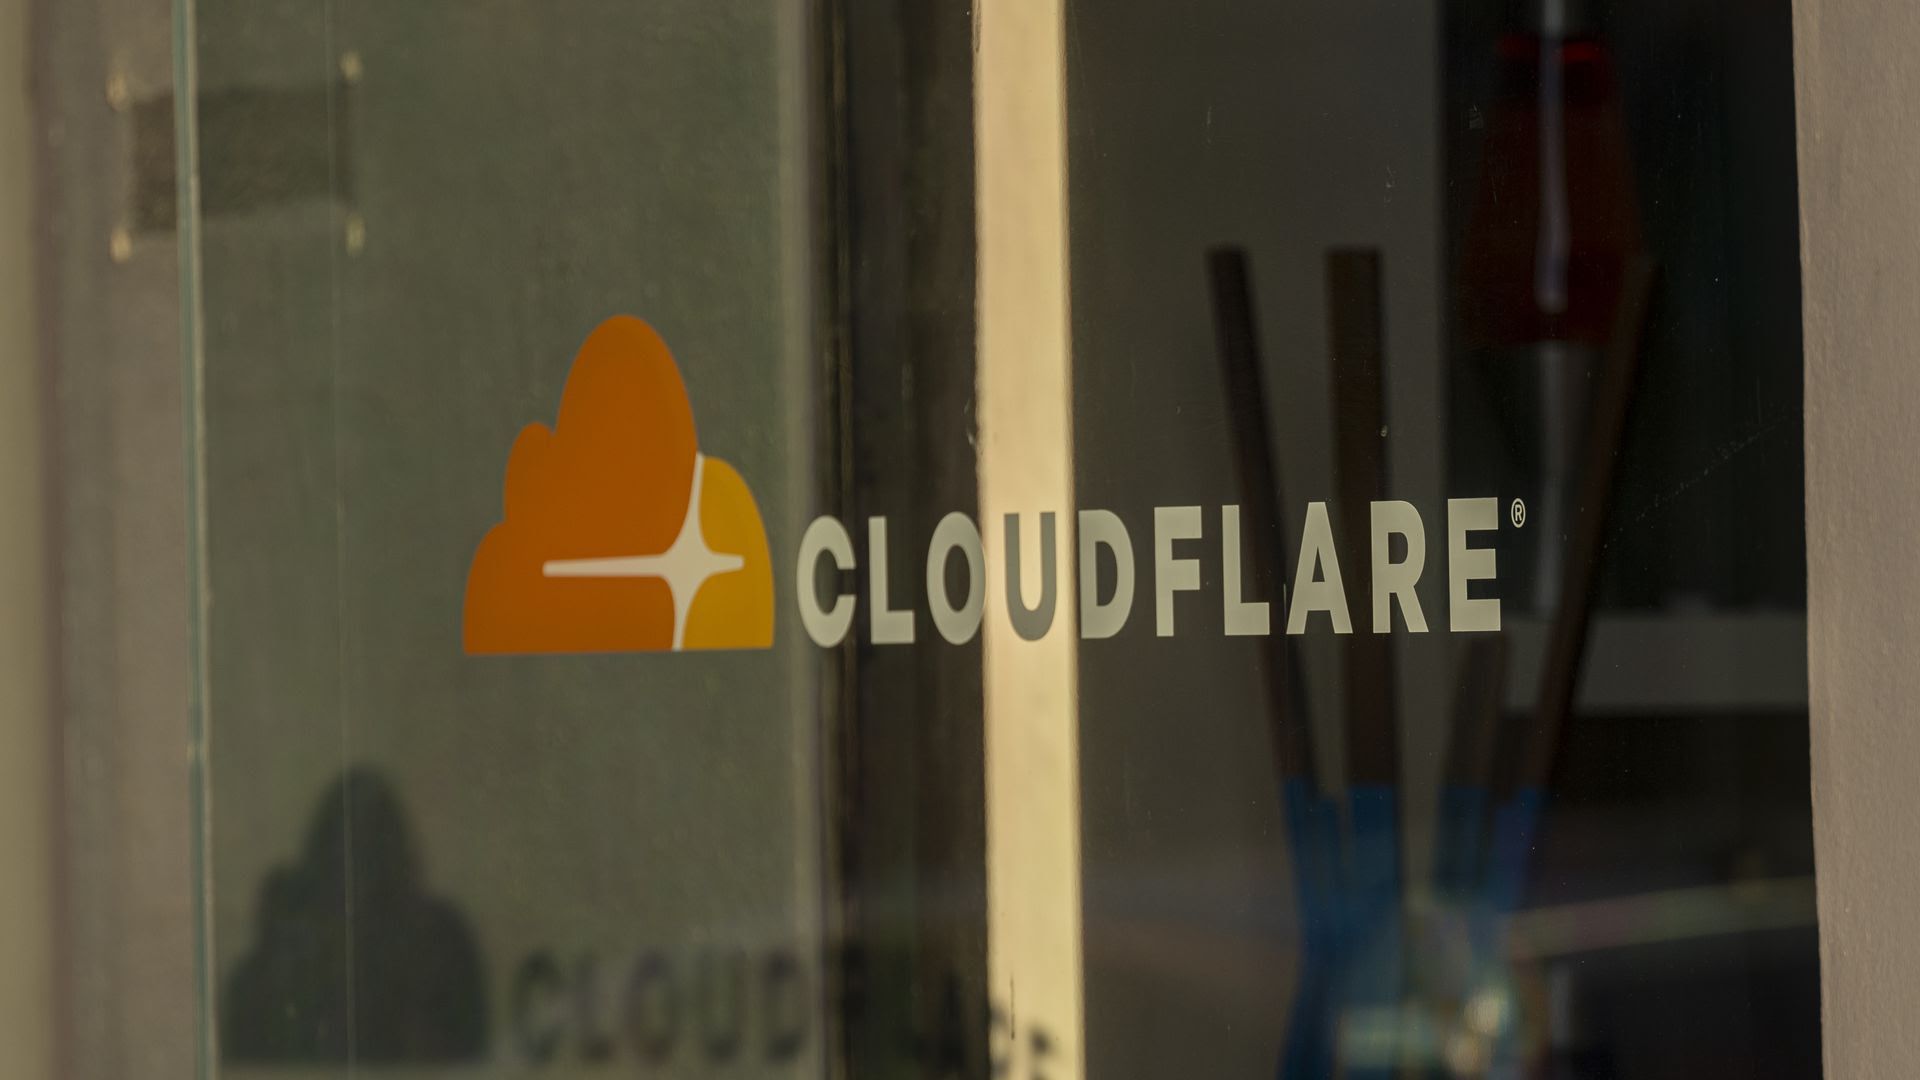 Cloudflare's logo on a window 